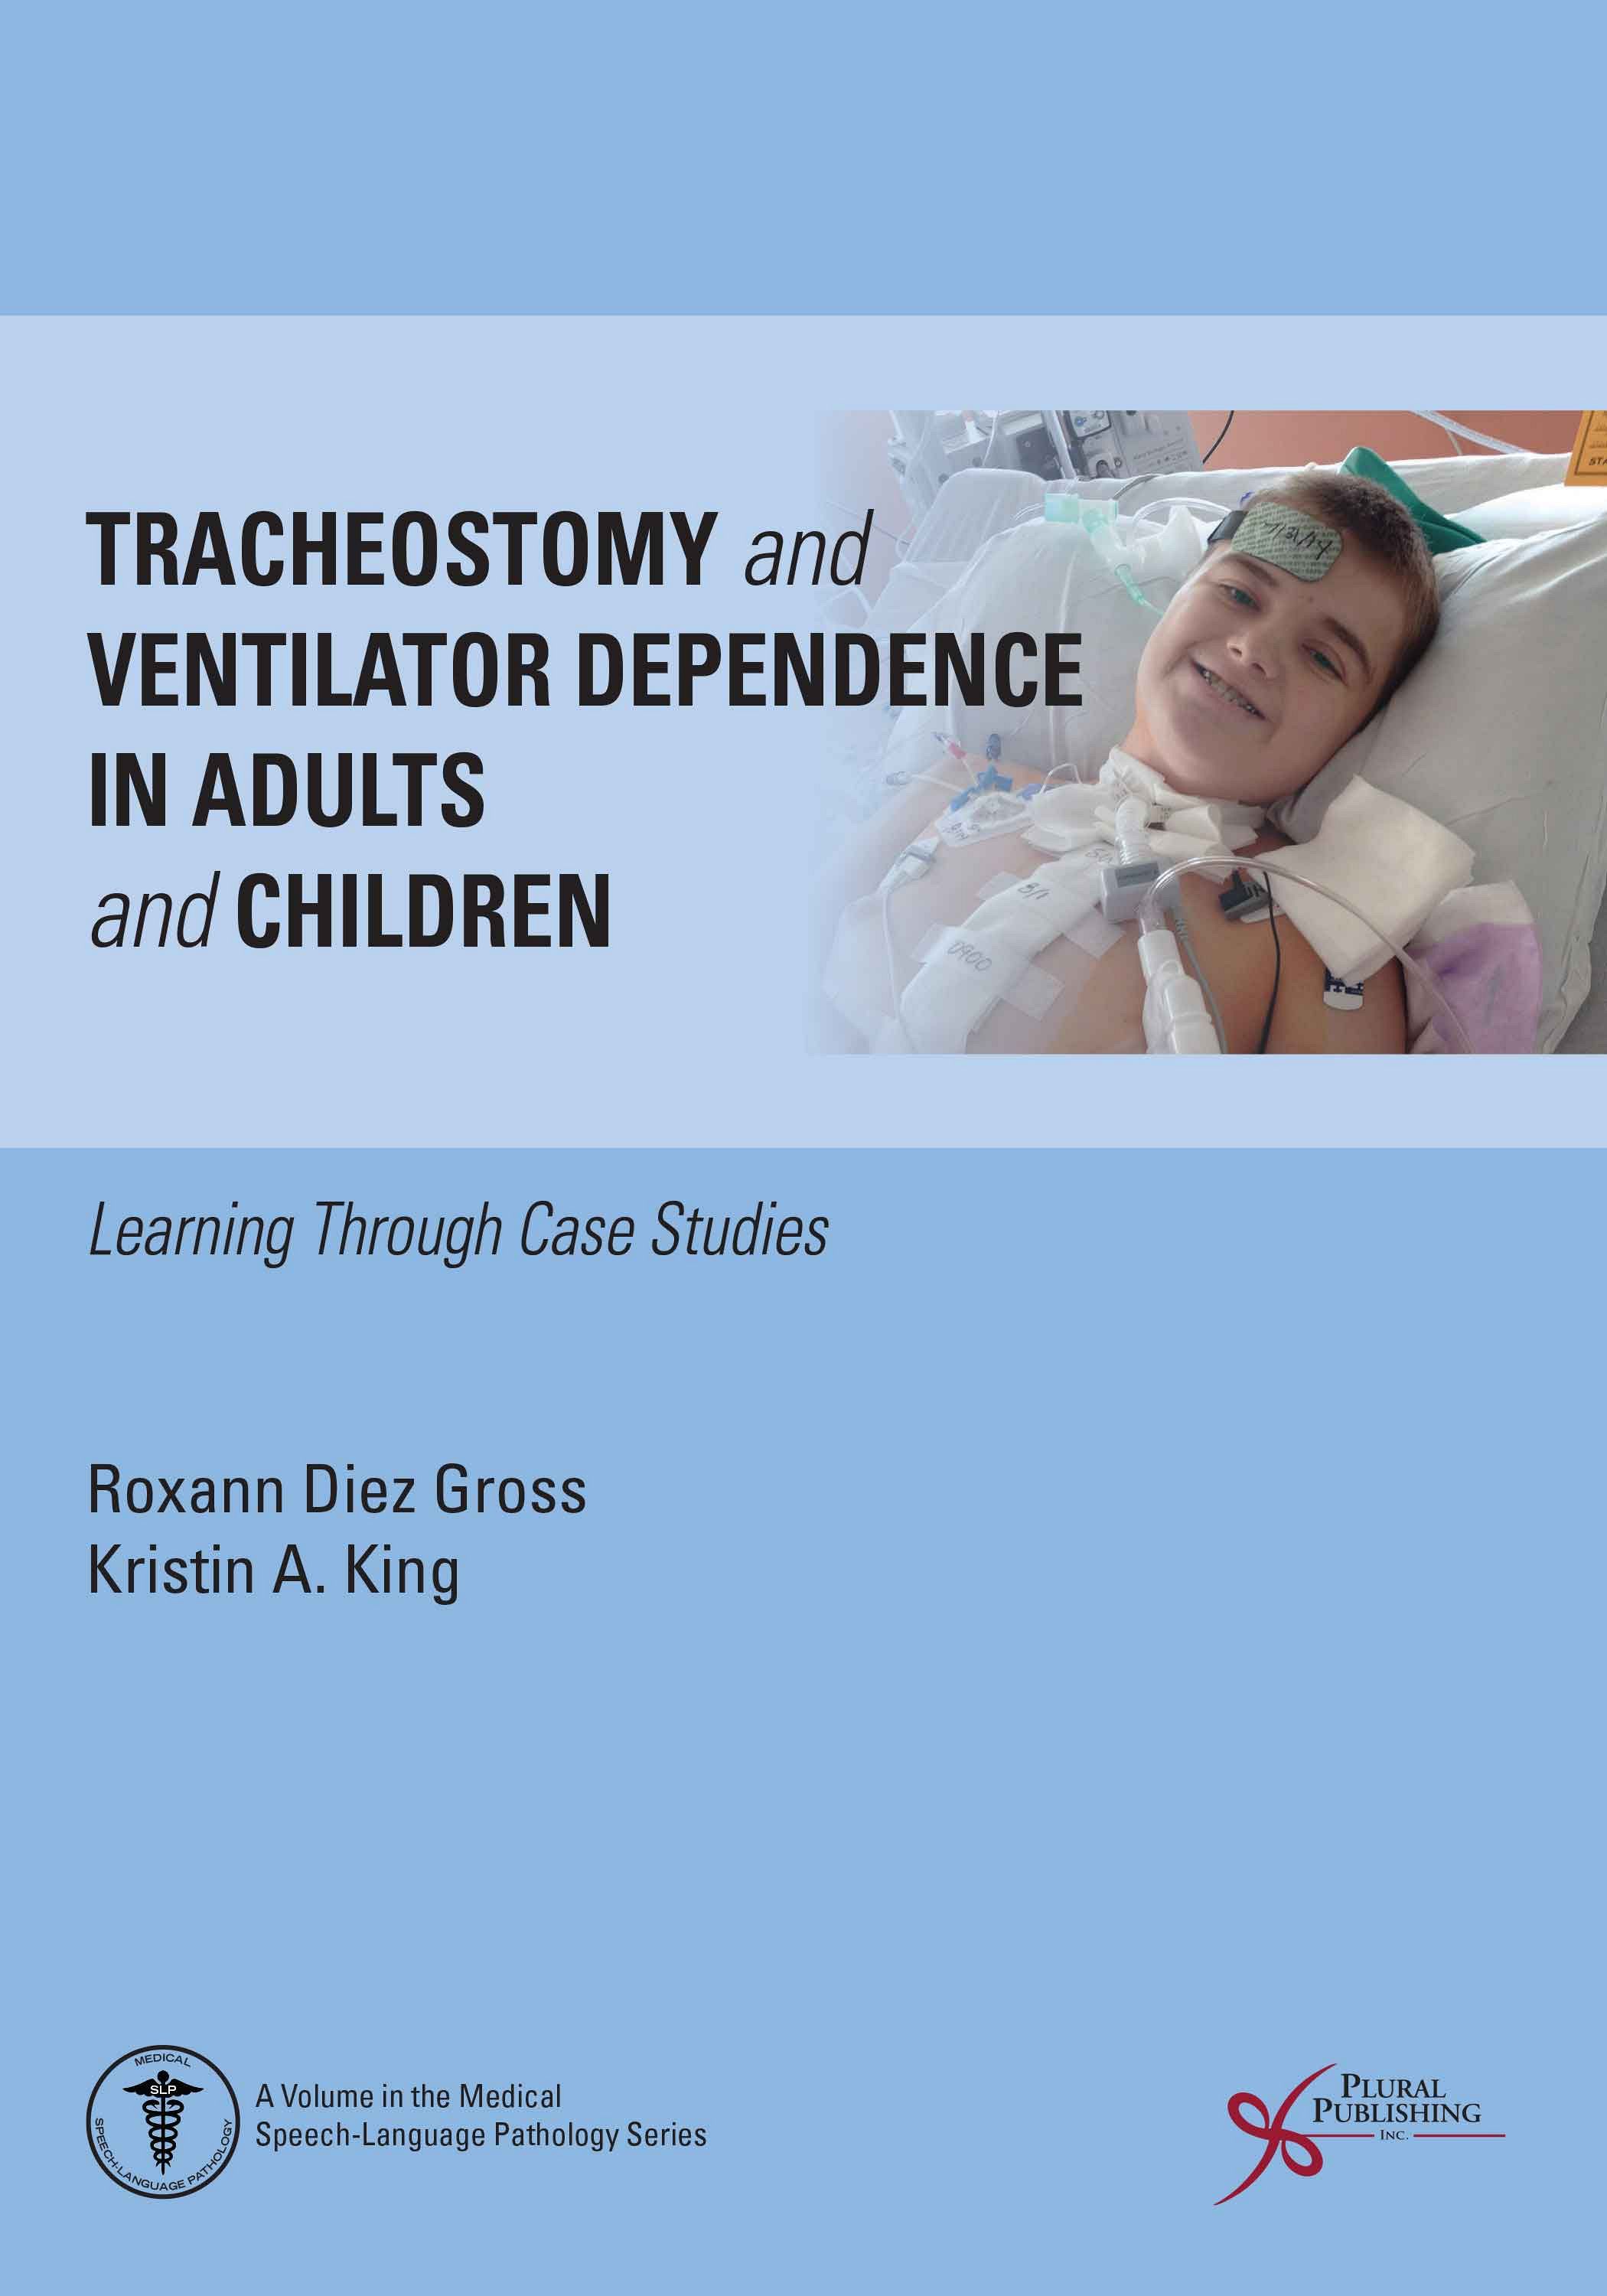 Tracheostomy and Ventilator Dependence In Adults and Children